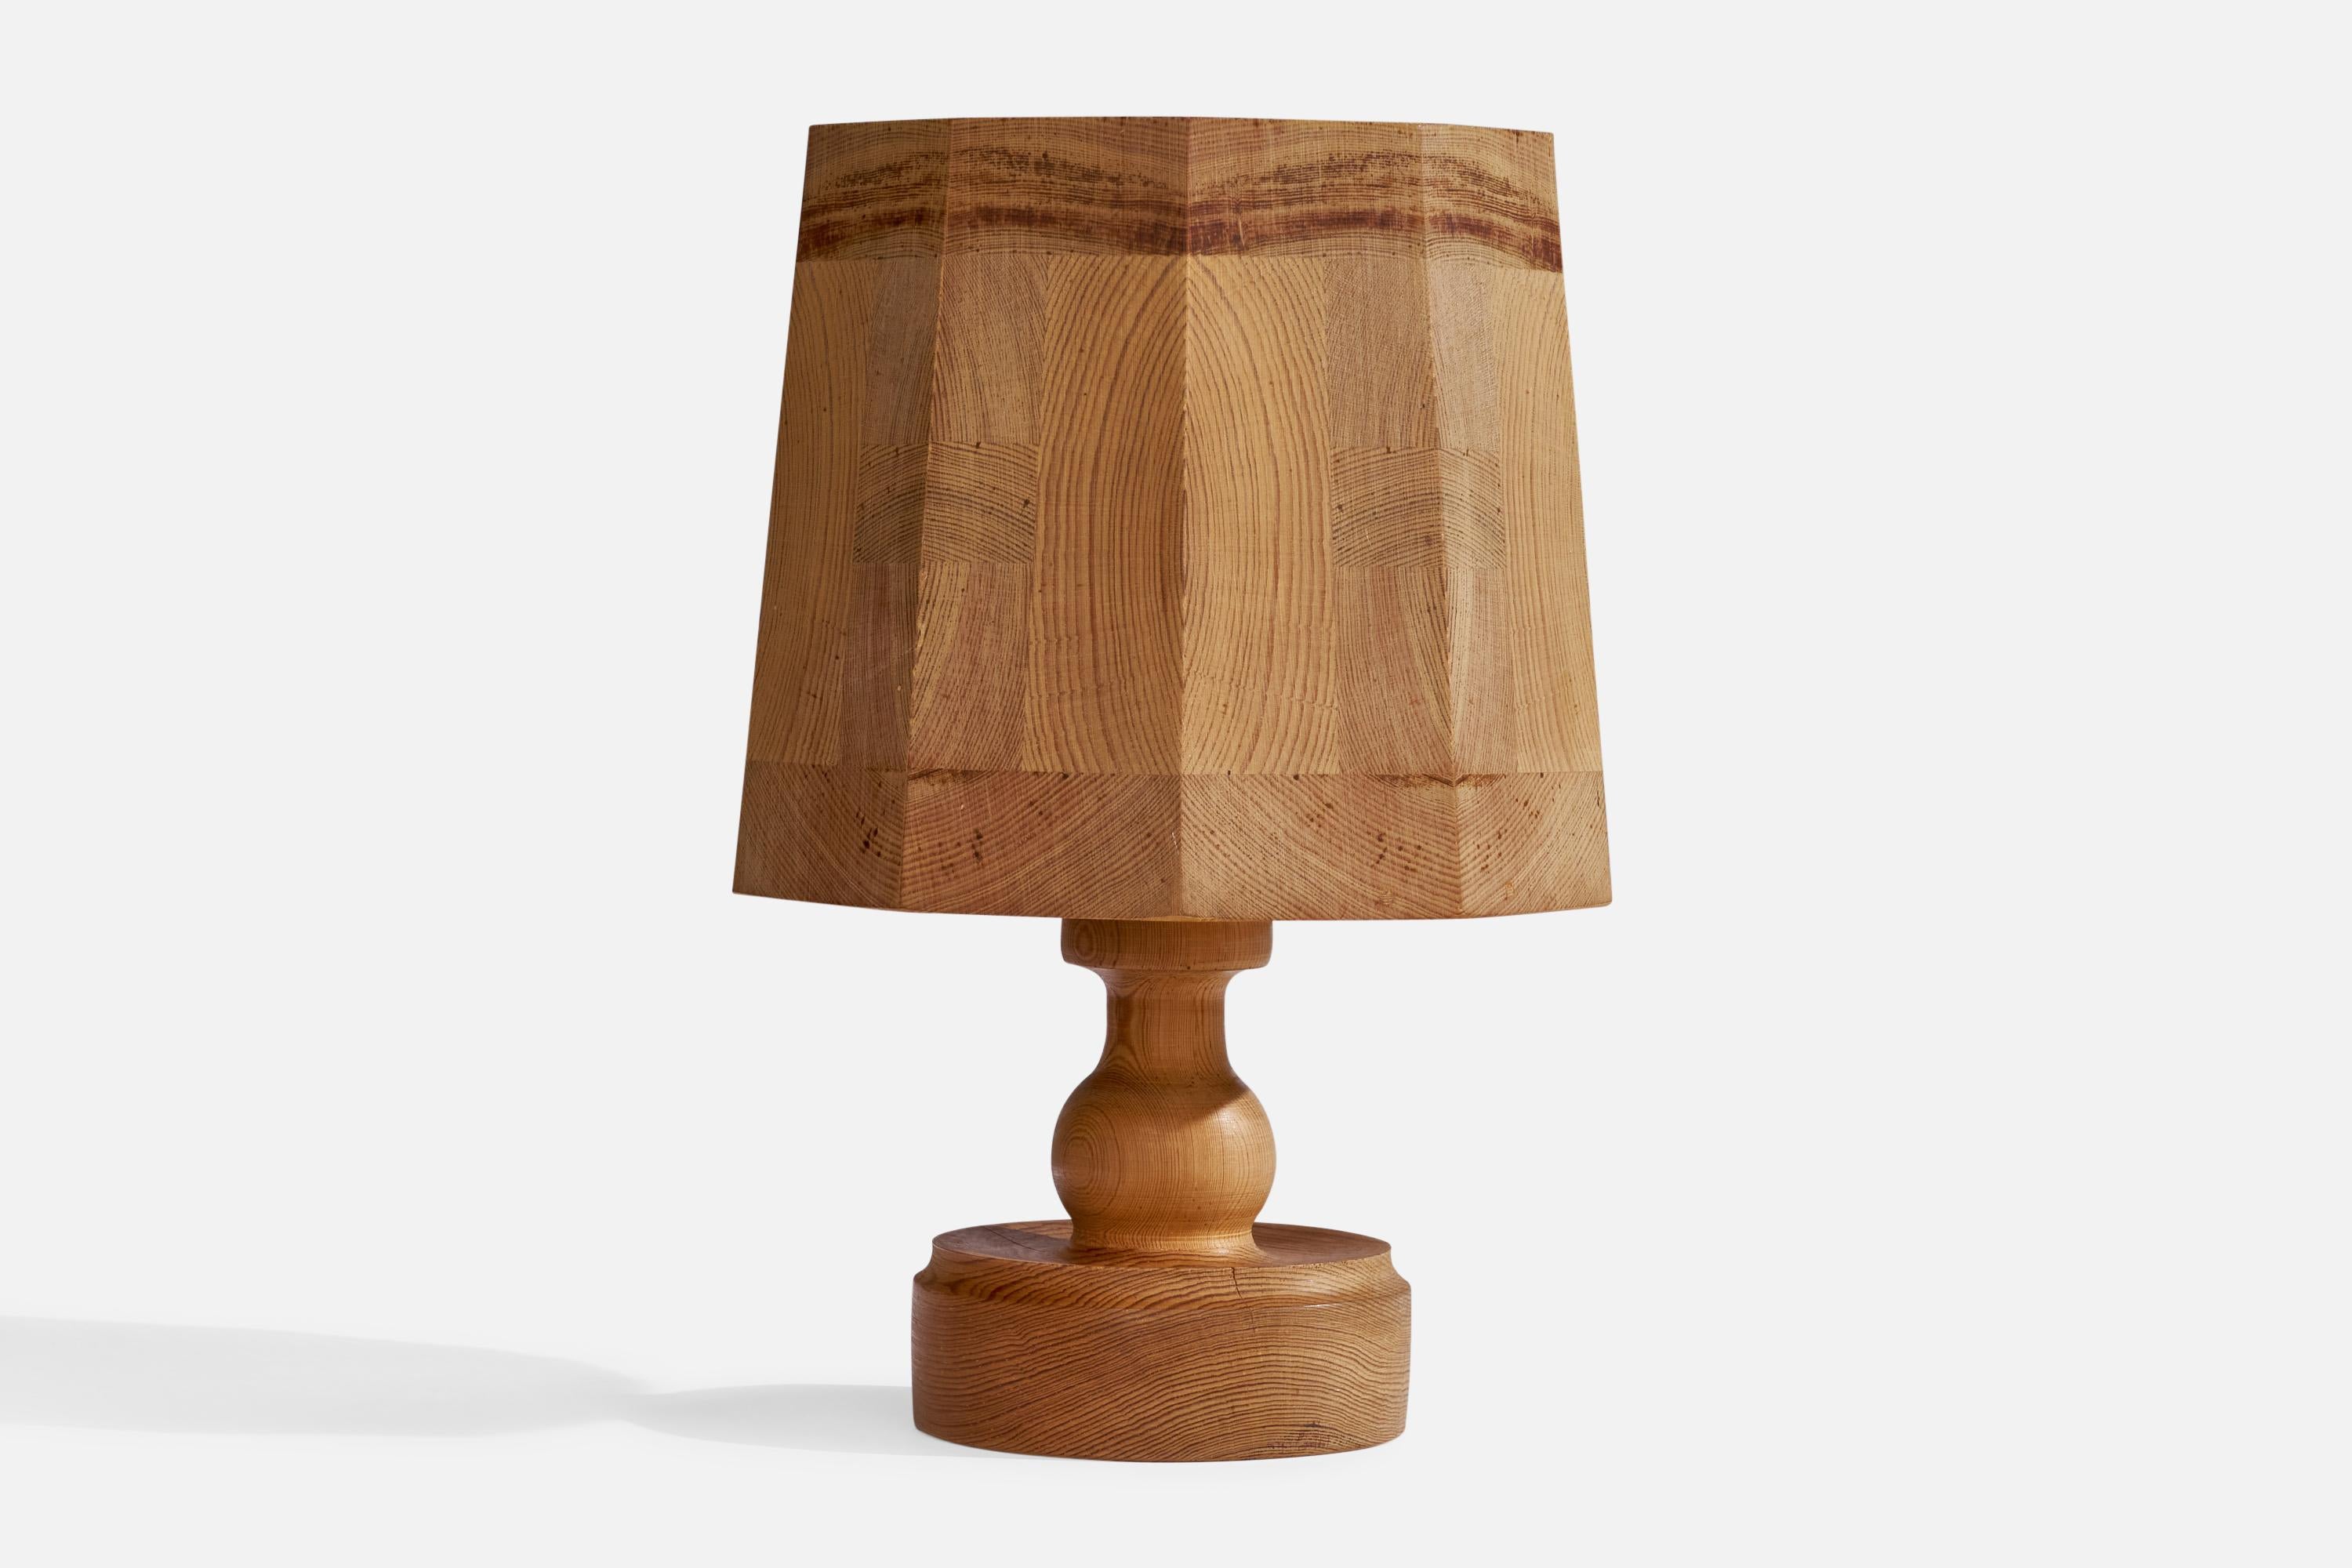 A pine table lamp designed and produced in Sweden, 1970s.

Overall Dimensions (inches): 12.25” H x 7”  W x 8.25”  D
Stated dimensions include shade.
Bulb Specifications: E-26 Bulb
Number of Sockets: 1
All lighting will be converted for US usage. We